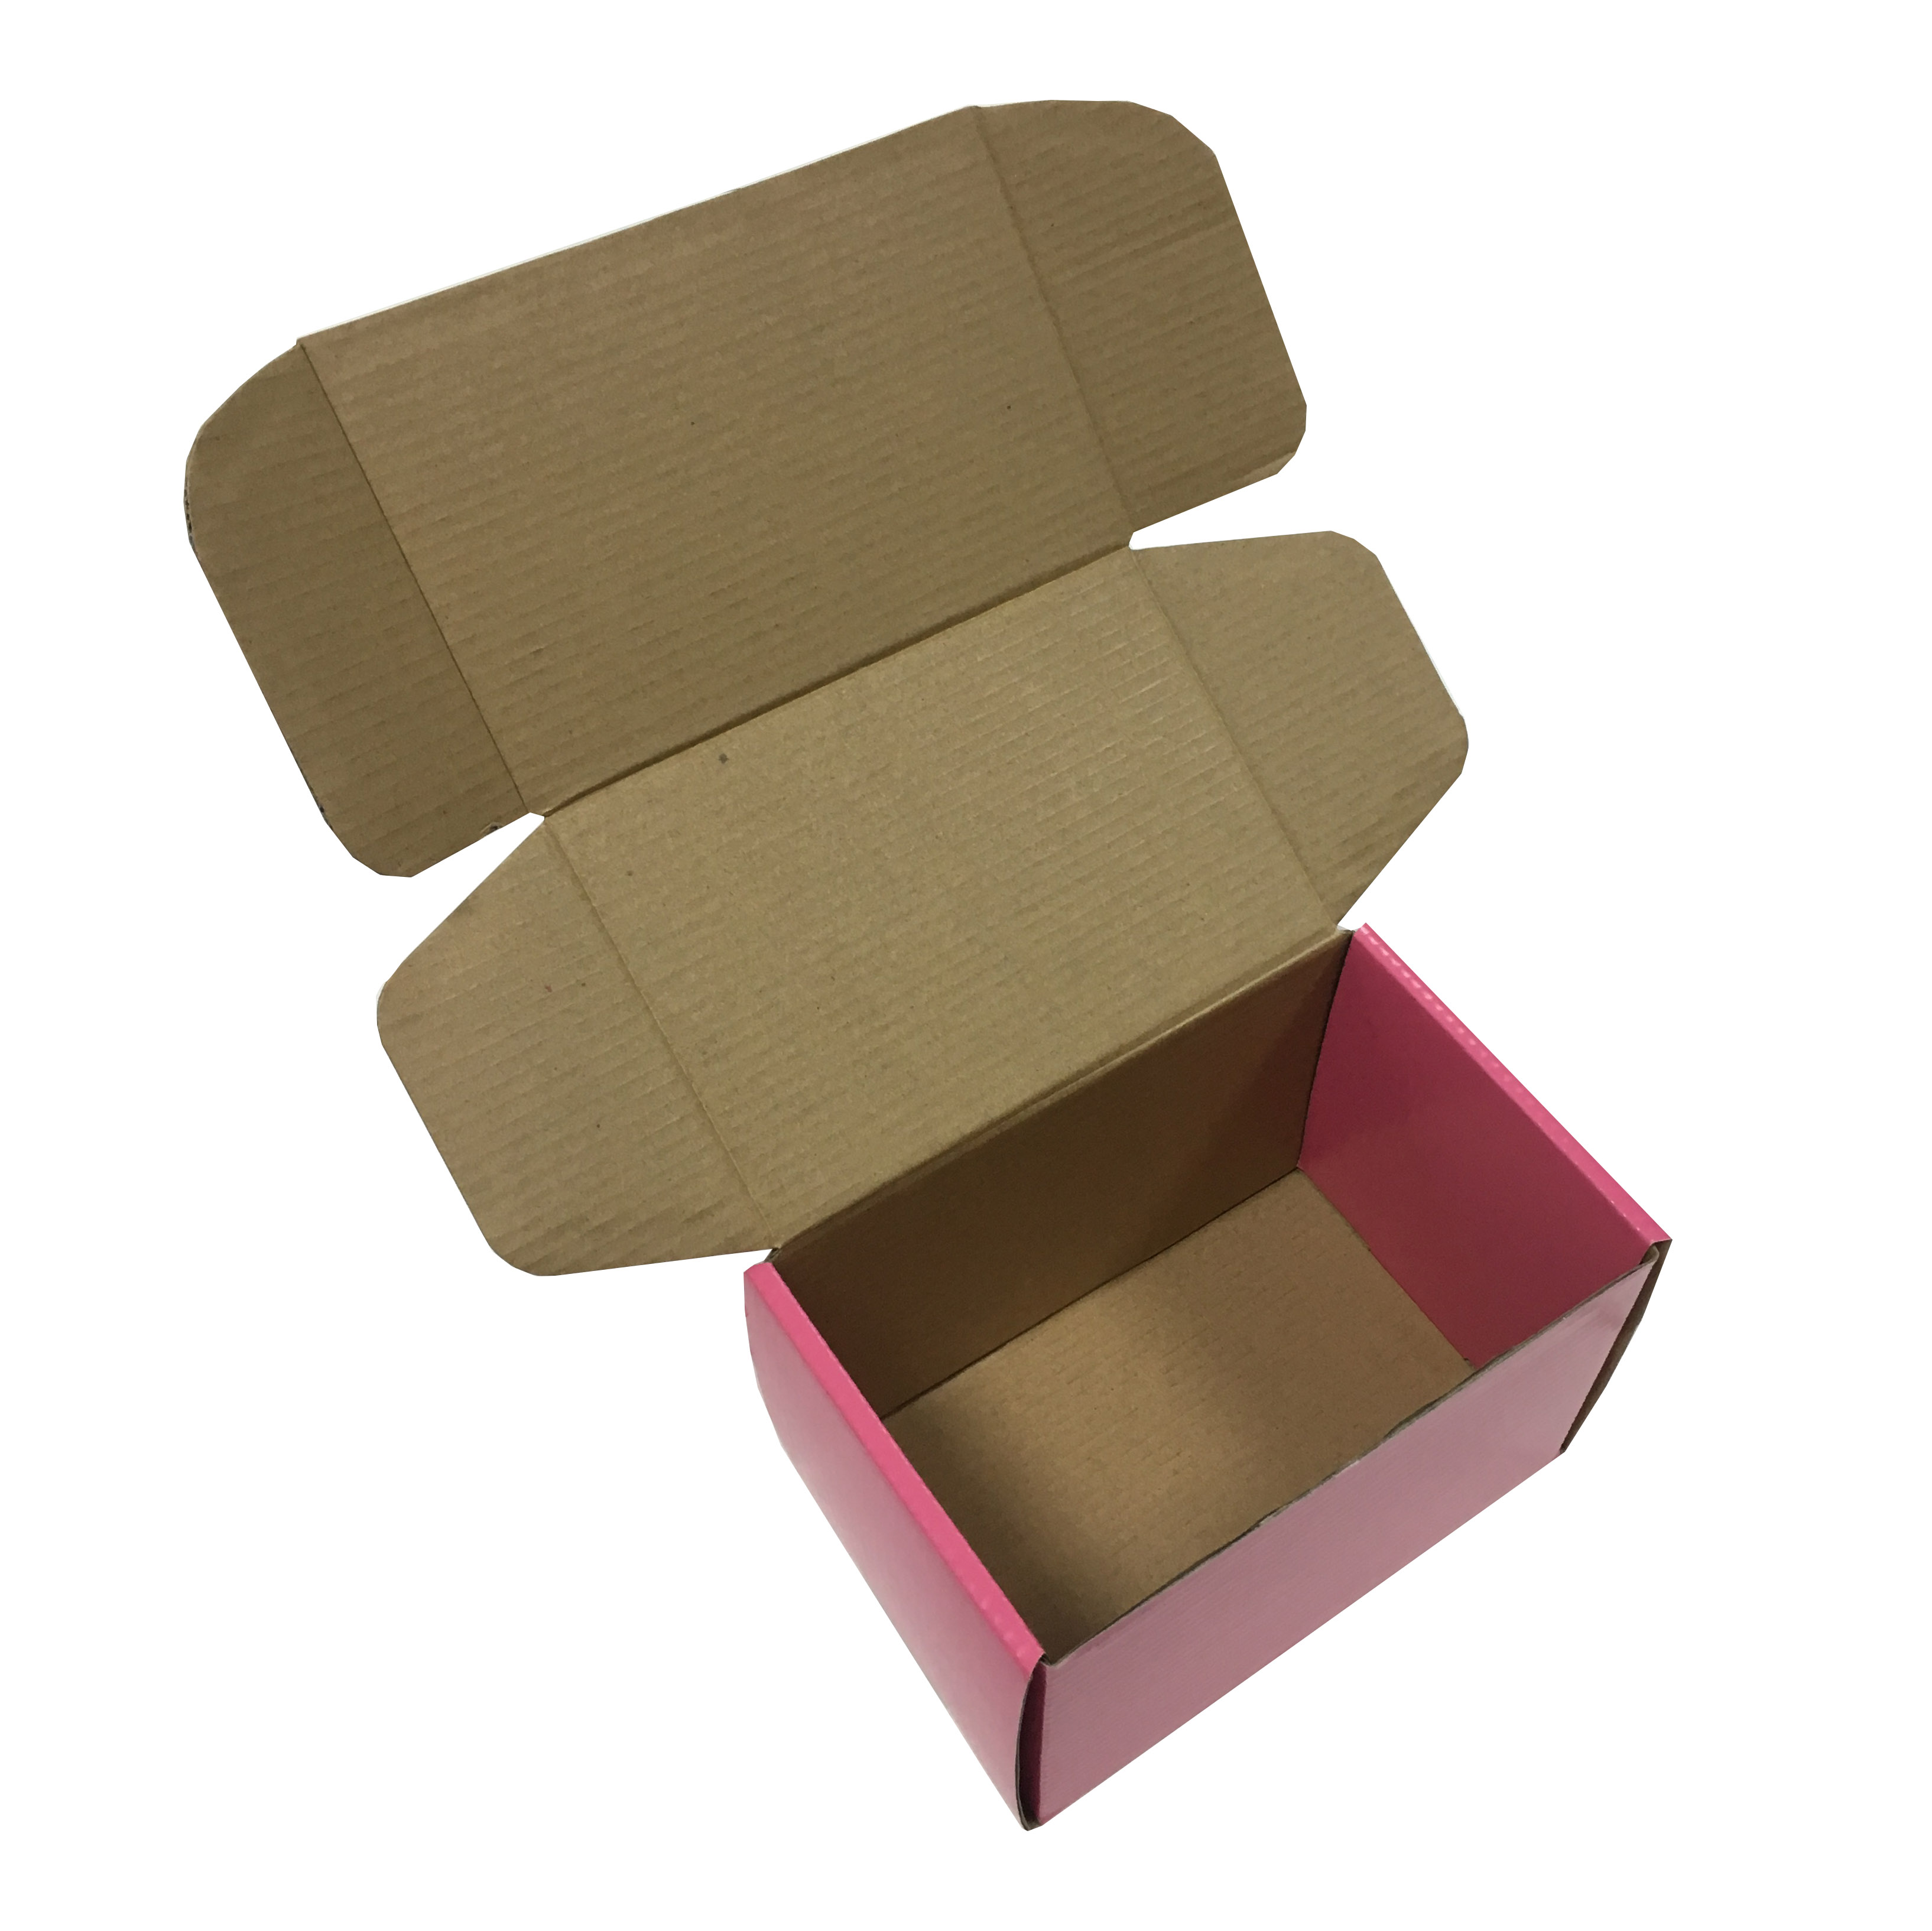 Undergarment Packaging Boxes